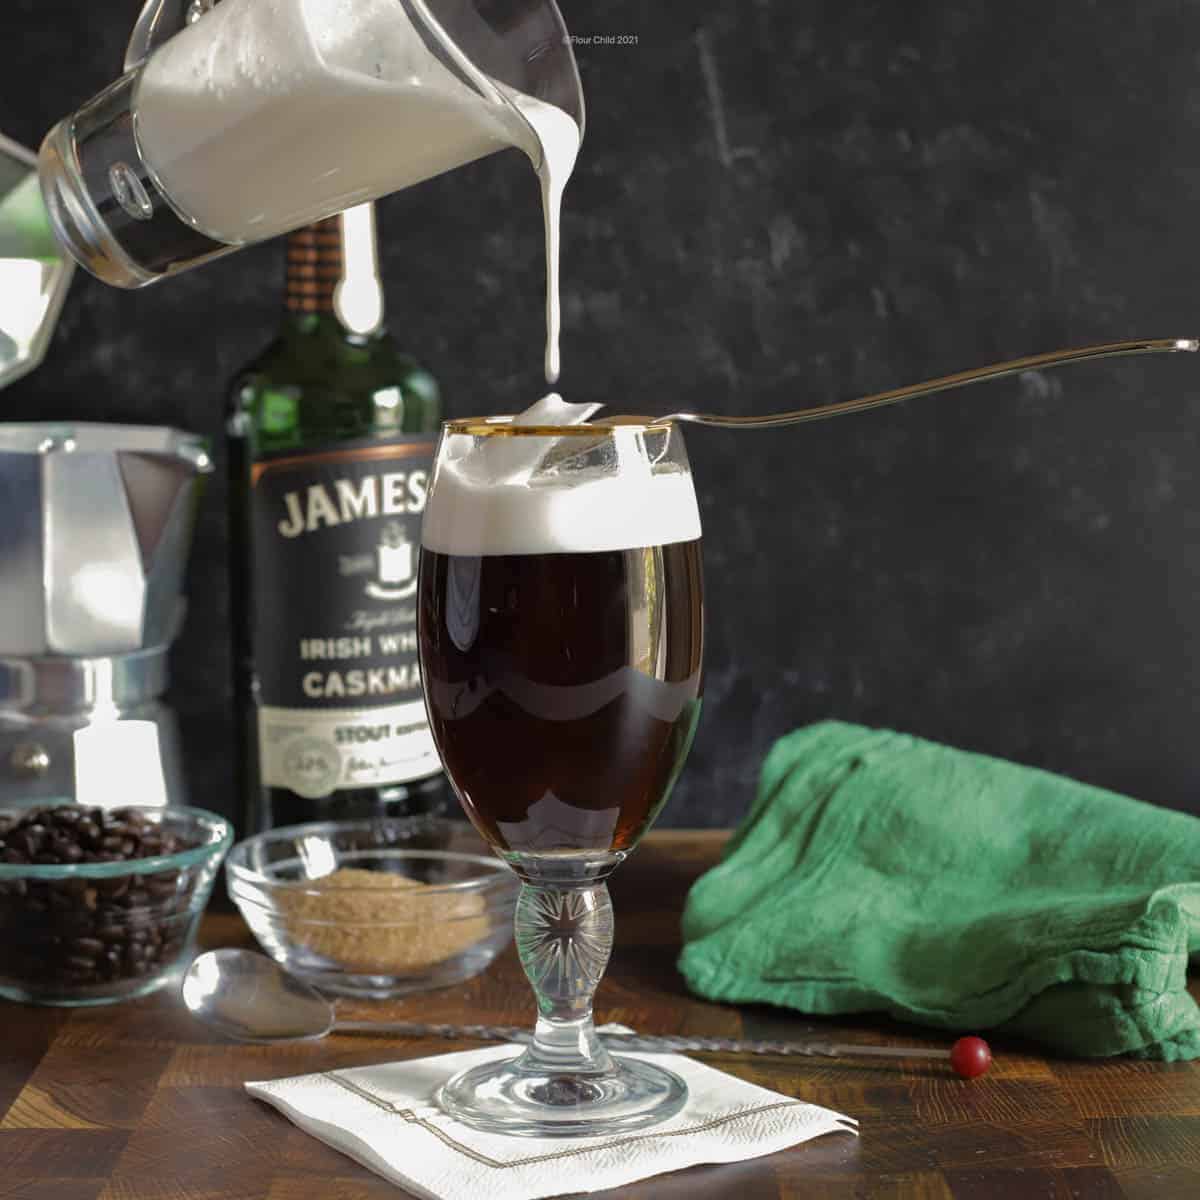 A hot coffee glass with Irish Whisky and cream